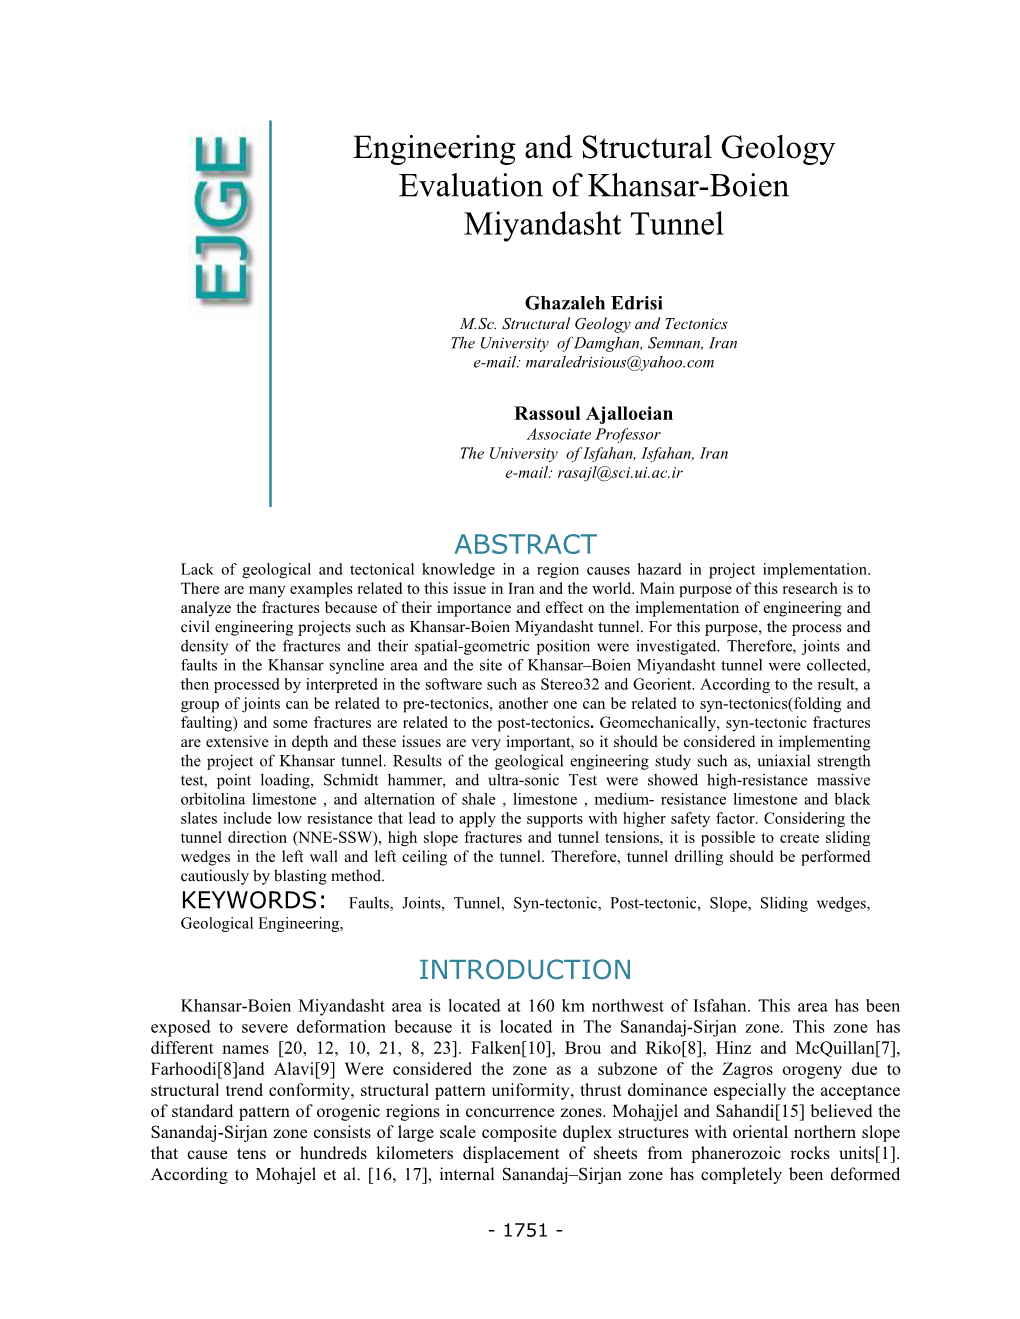 Engineering and Structural Geology Evaluation of Khansar-Boien Miyandasht Tunnel